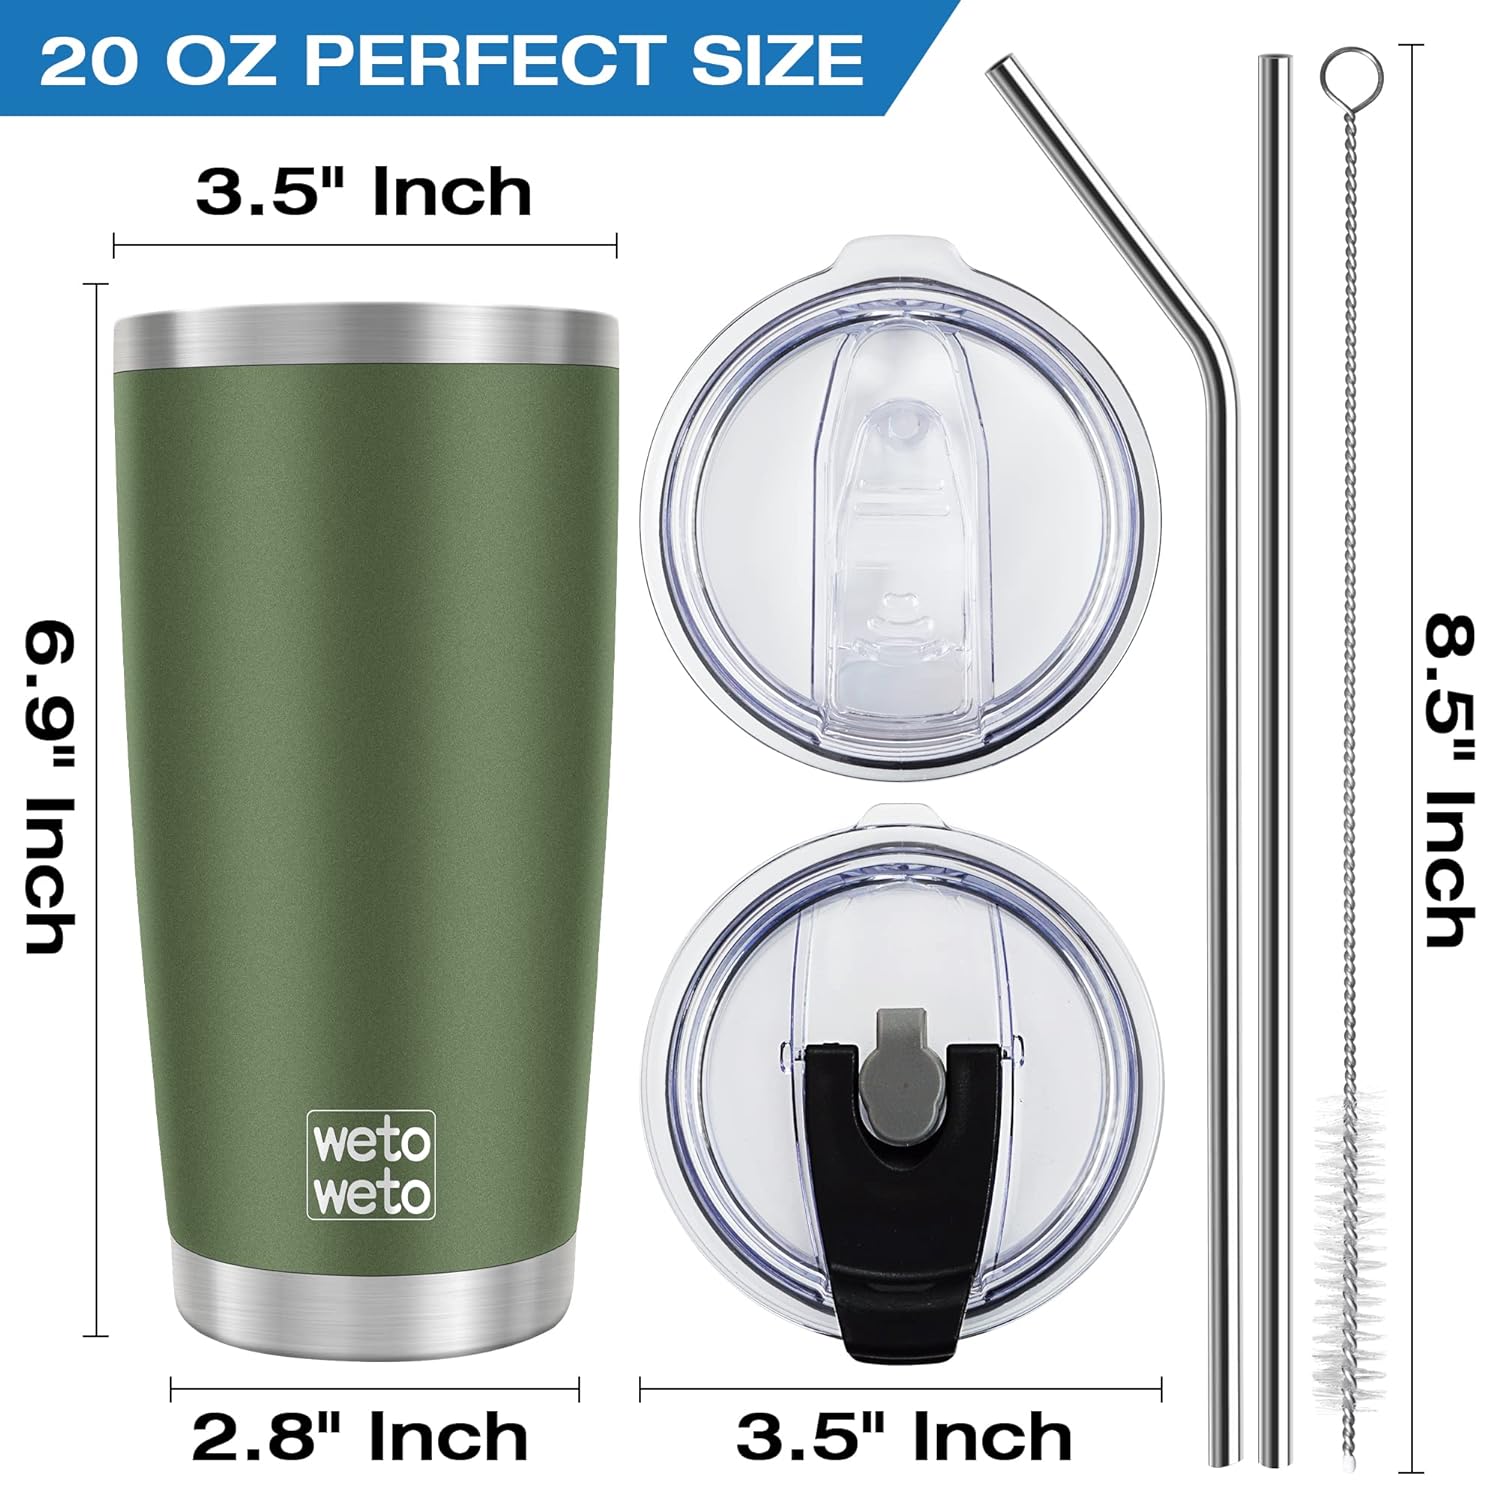 WETOWETO 20oz Insulated Stainless Steel Tumbler, Coffee Tumbler with 2 lids and 2 straws, Double Wall Vacuum Travel Coffee Mug, Powder Coated Leak-Proof Tumbler Cup for Travel (Army Green,1 Pack)